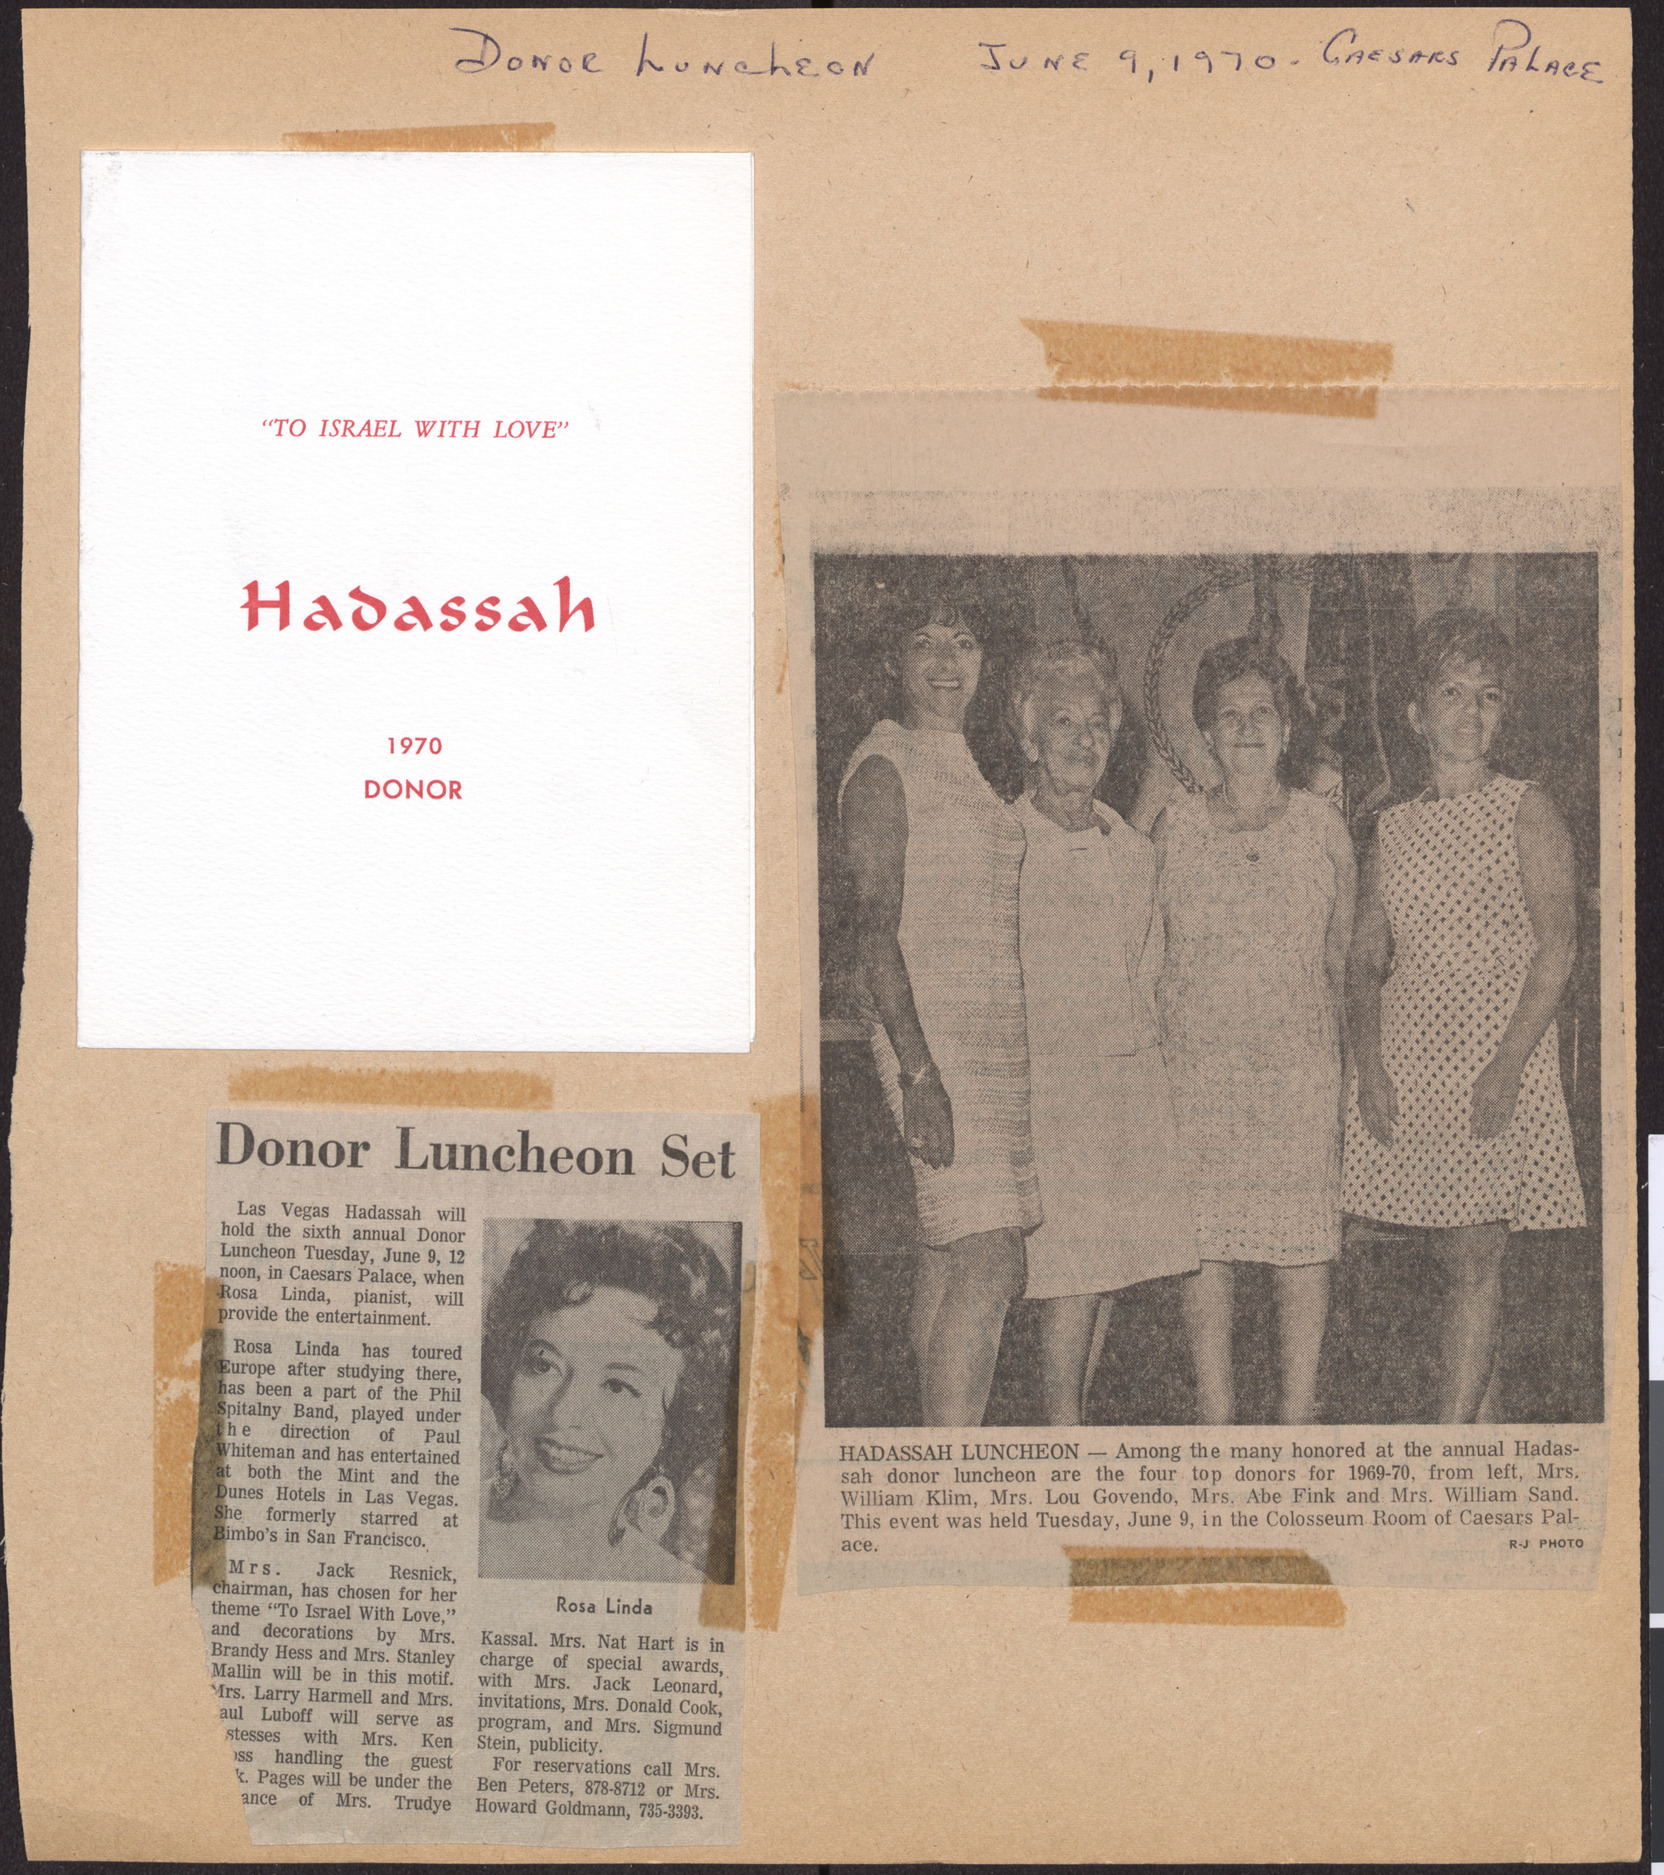 Newspaper clippings and program for Hadassah donor luncheon, June 9, 1970